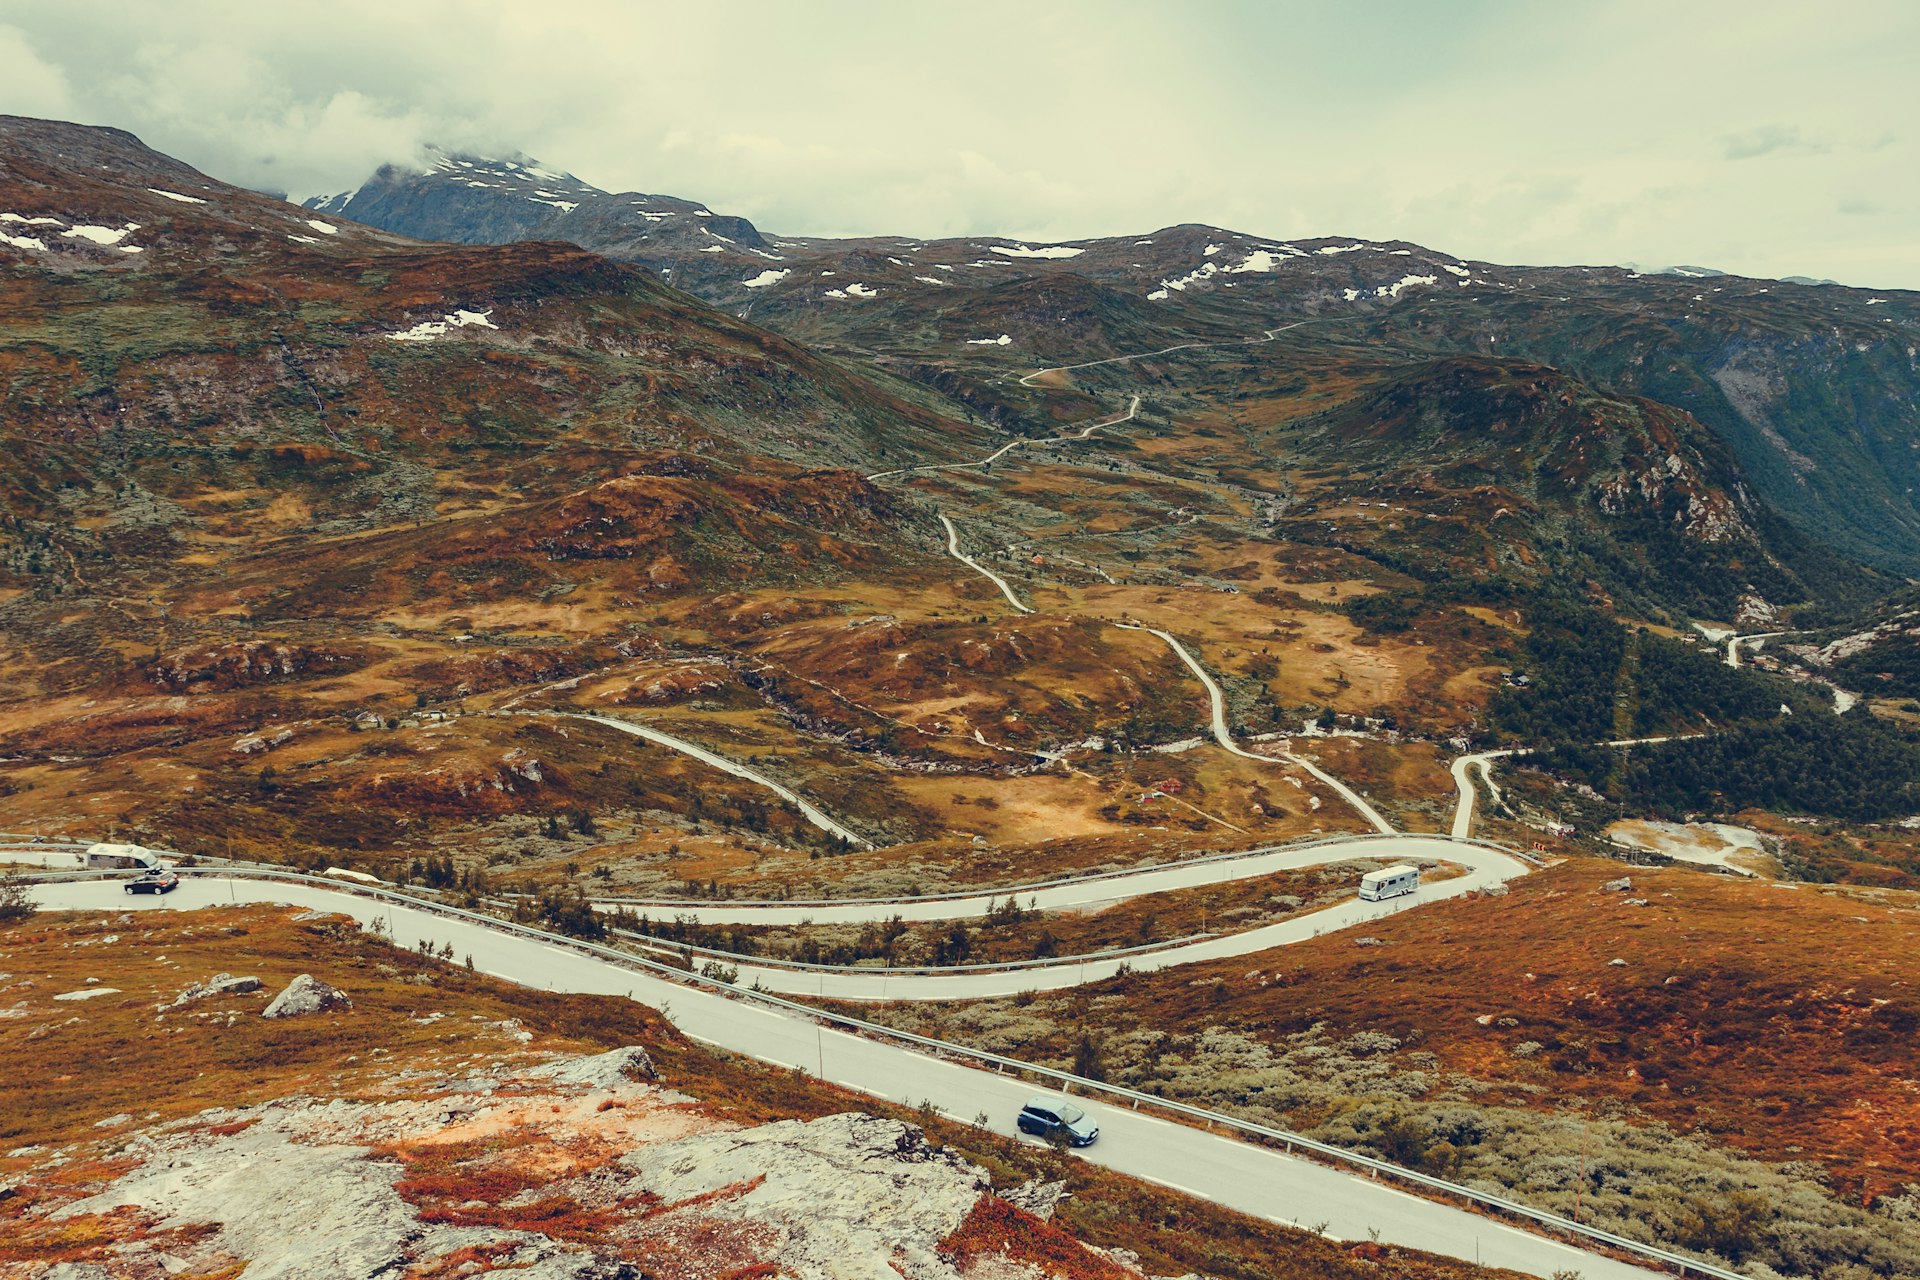 A zig-zagging passage of Rte 55 across the Sognefjellet plateau, Norway